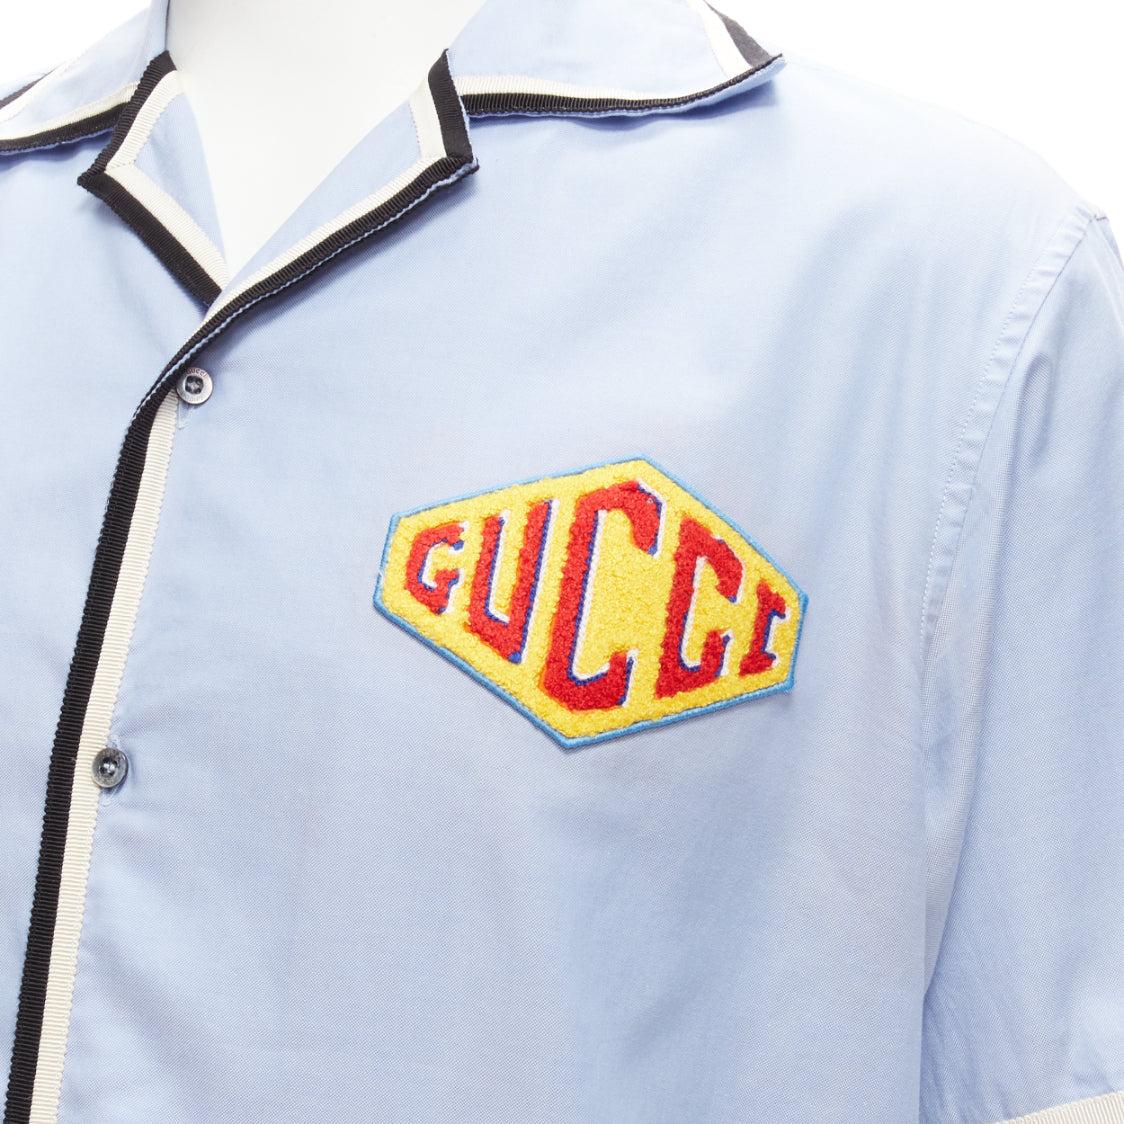 GUCCI Alessandro Michele 2017 blue teddy logo trimmed short sleeve shirt IT46 M
Reference: JSLE/A00052
Brand: Gucci
Designer: Alessandro Michele
Collection: 2017
Material: Cotton
Color: Blue, Yellow
Pattern: Solid
Closure: Button
Extra Details: